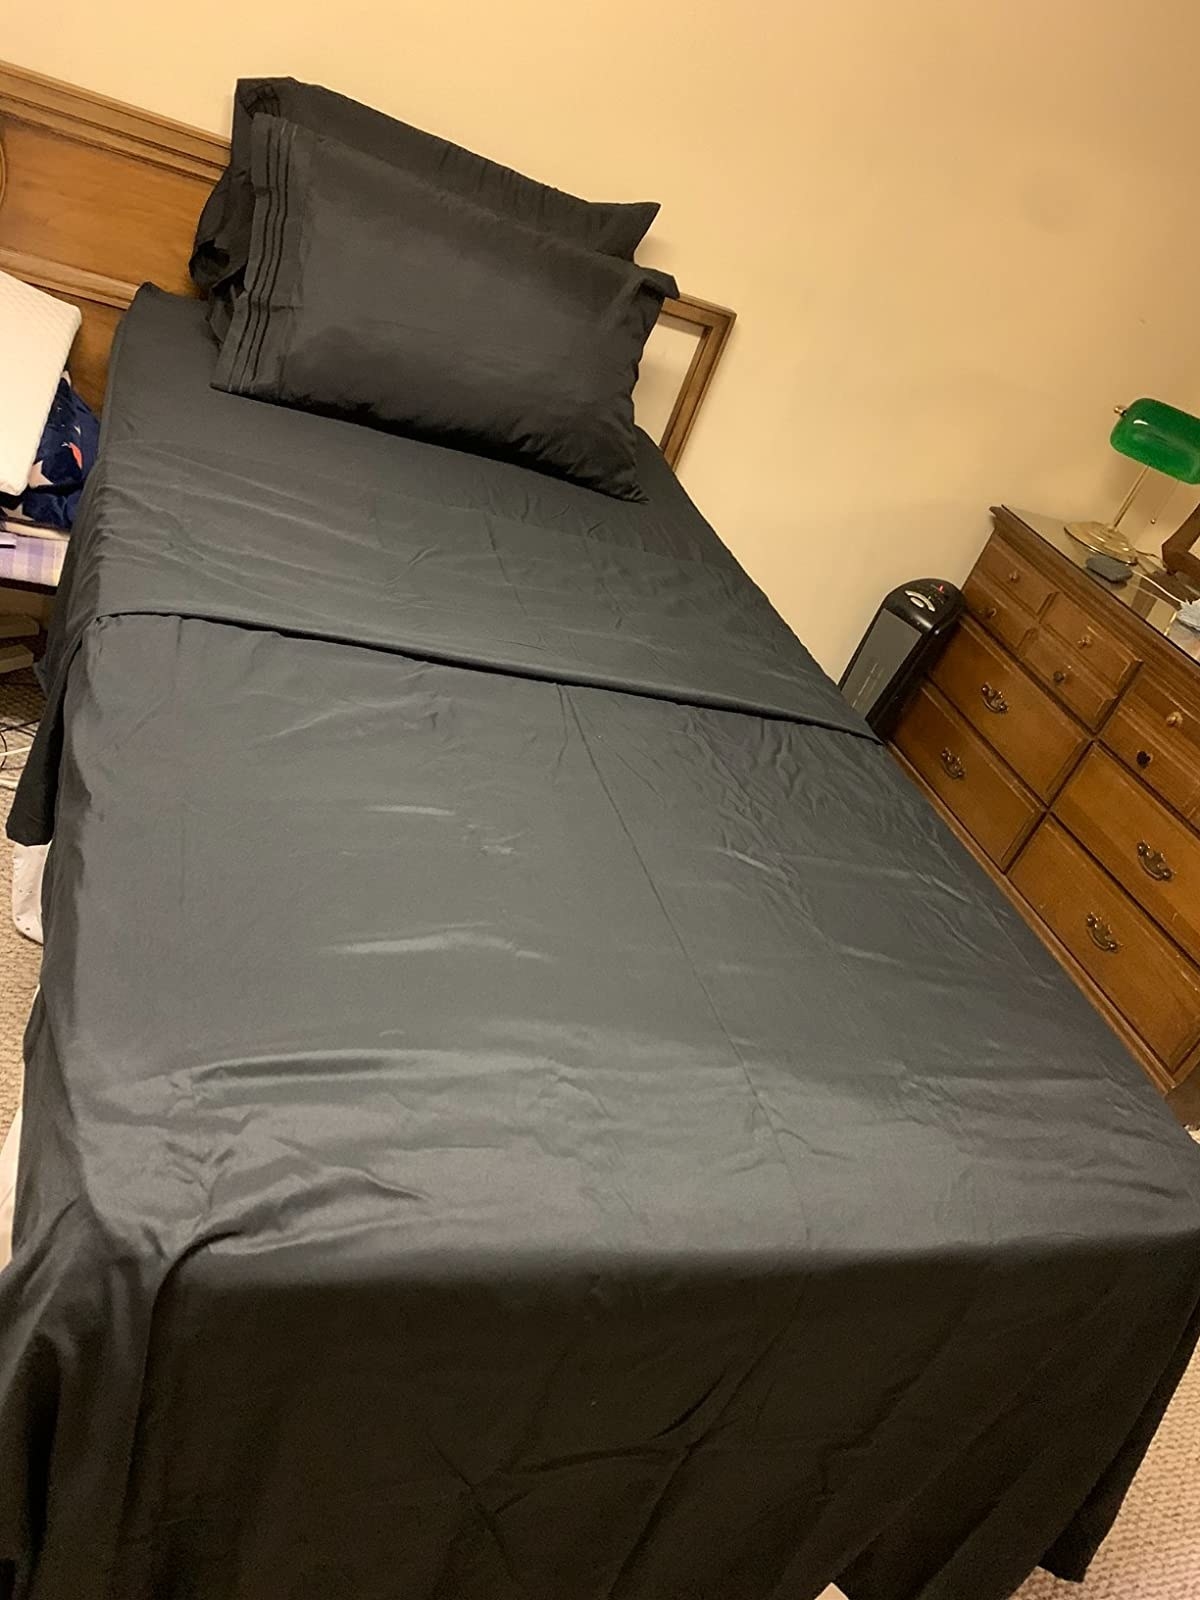 The sheets on reviewer&#x27;s bed